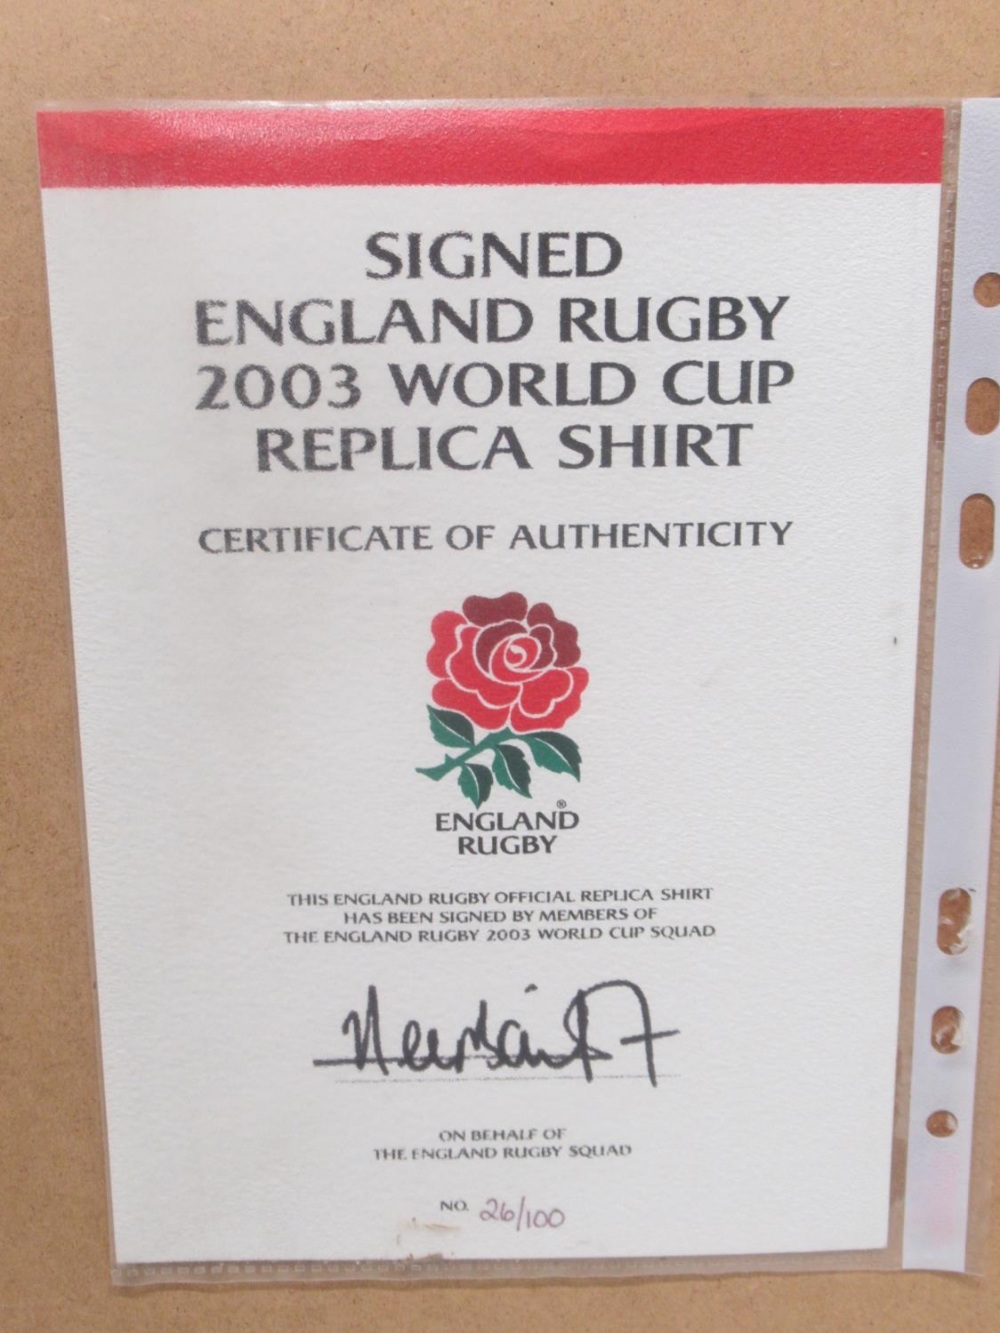 Limited Edition no.26/100 Signed England Rugby 2003 World Cup Replica Shirt, with COA from England - Image 5 of 5